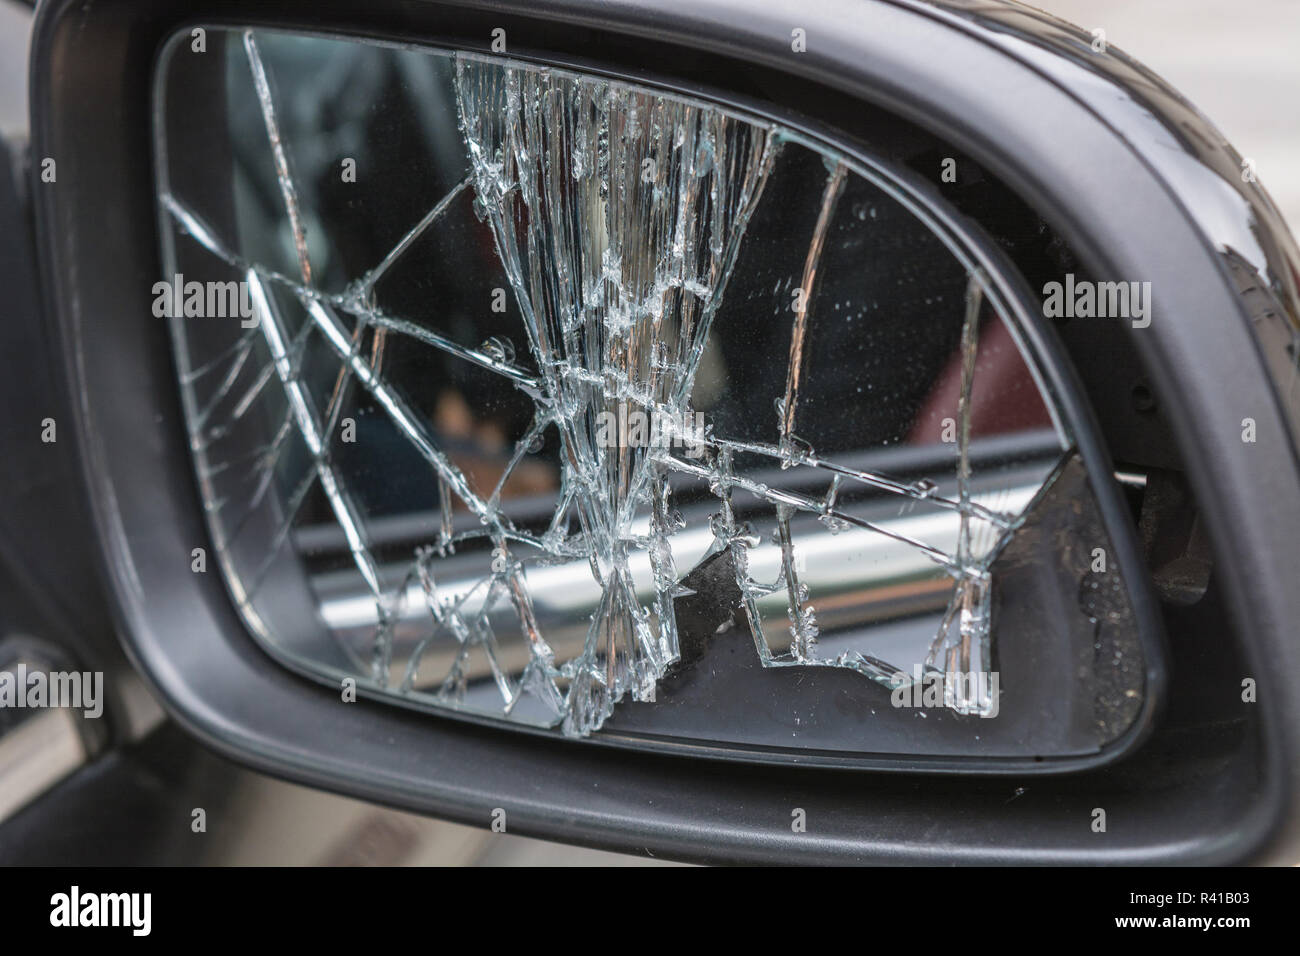 torn car side mirror Stock Photo